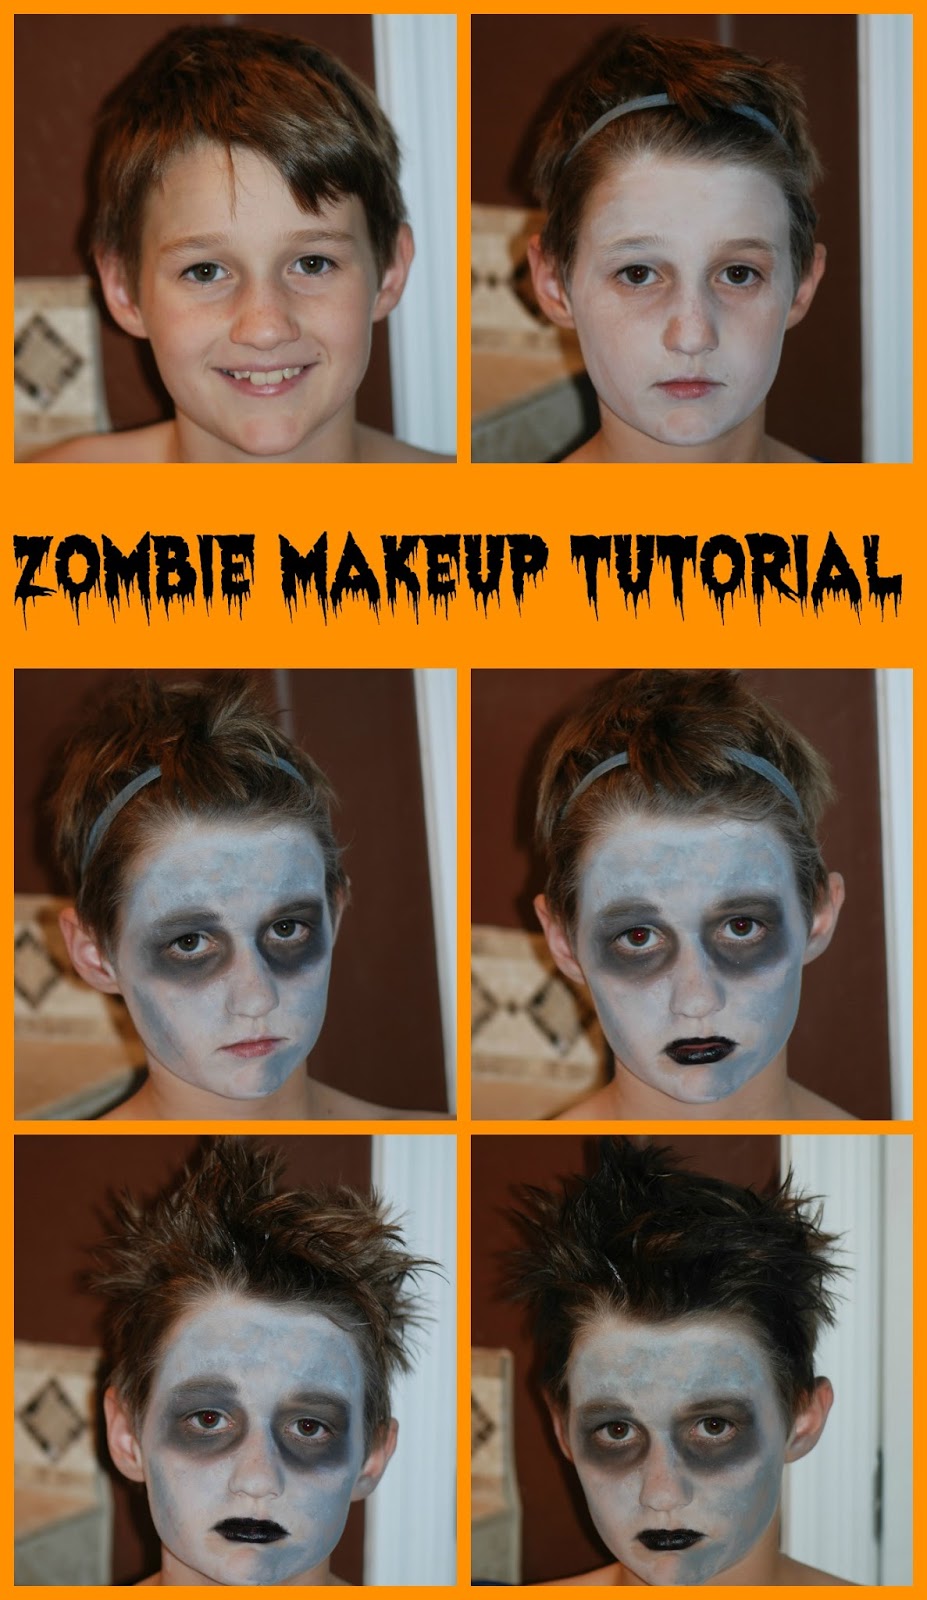 Zombie Baseball Player   Makeup and Costume Tutorial   Sweet ...